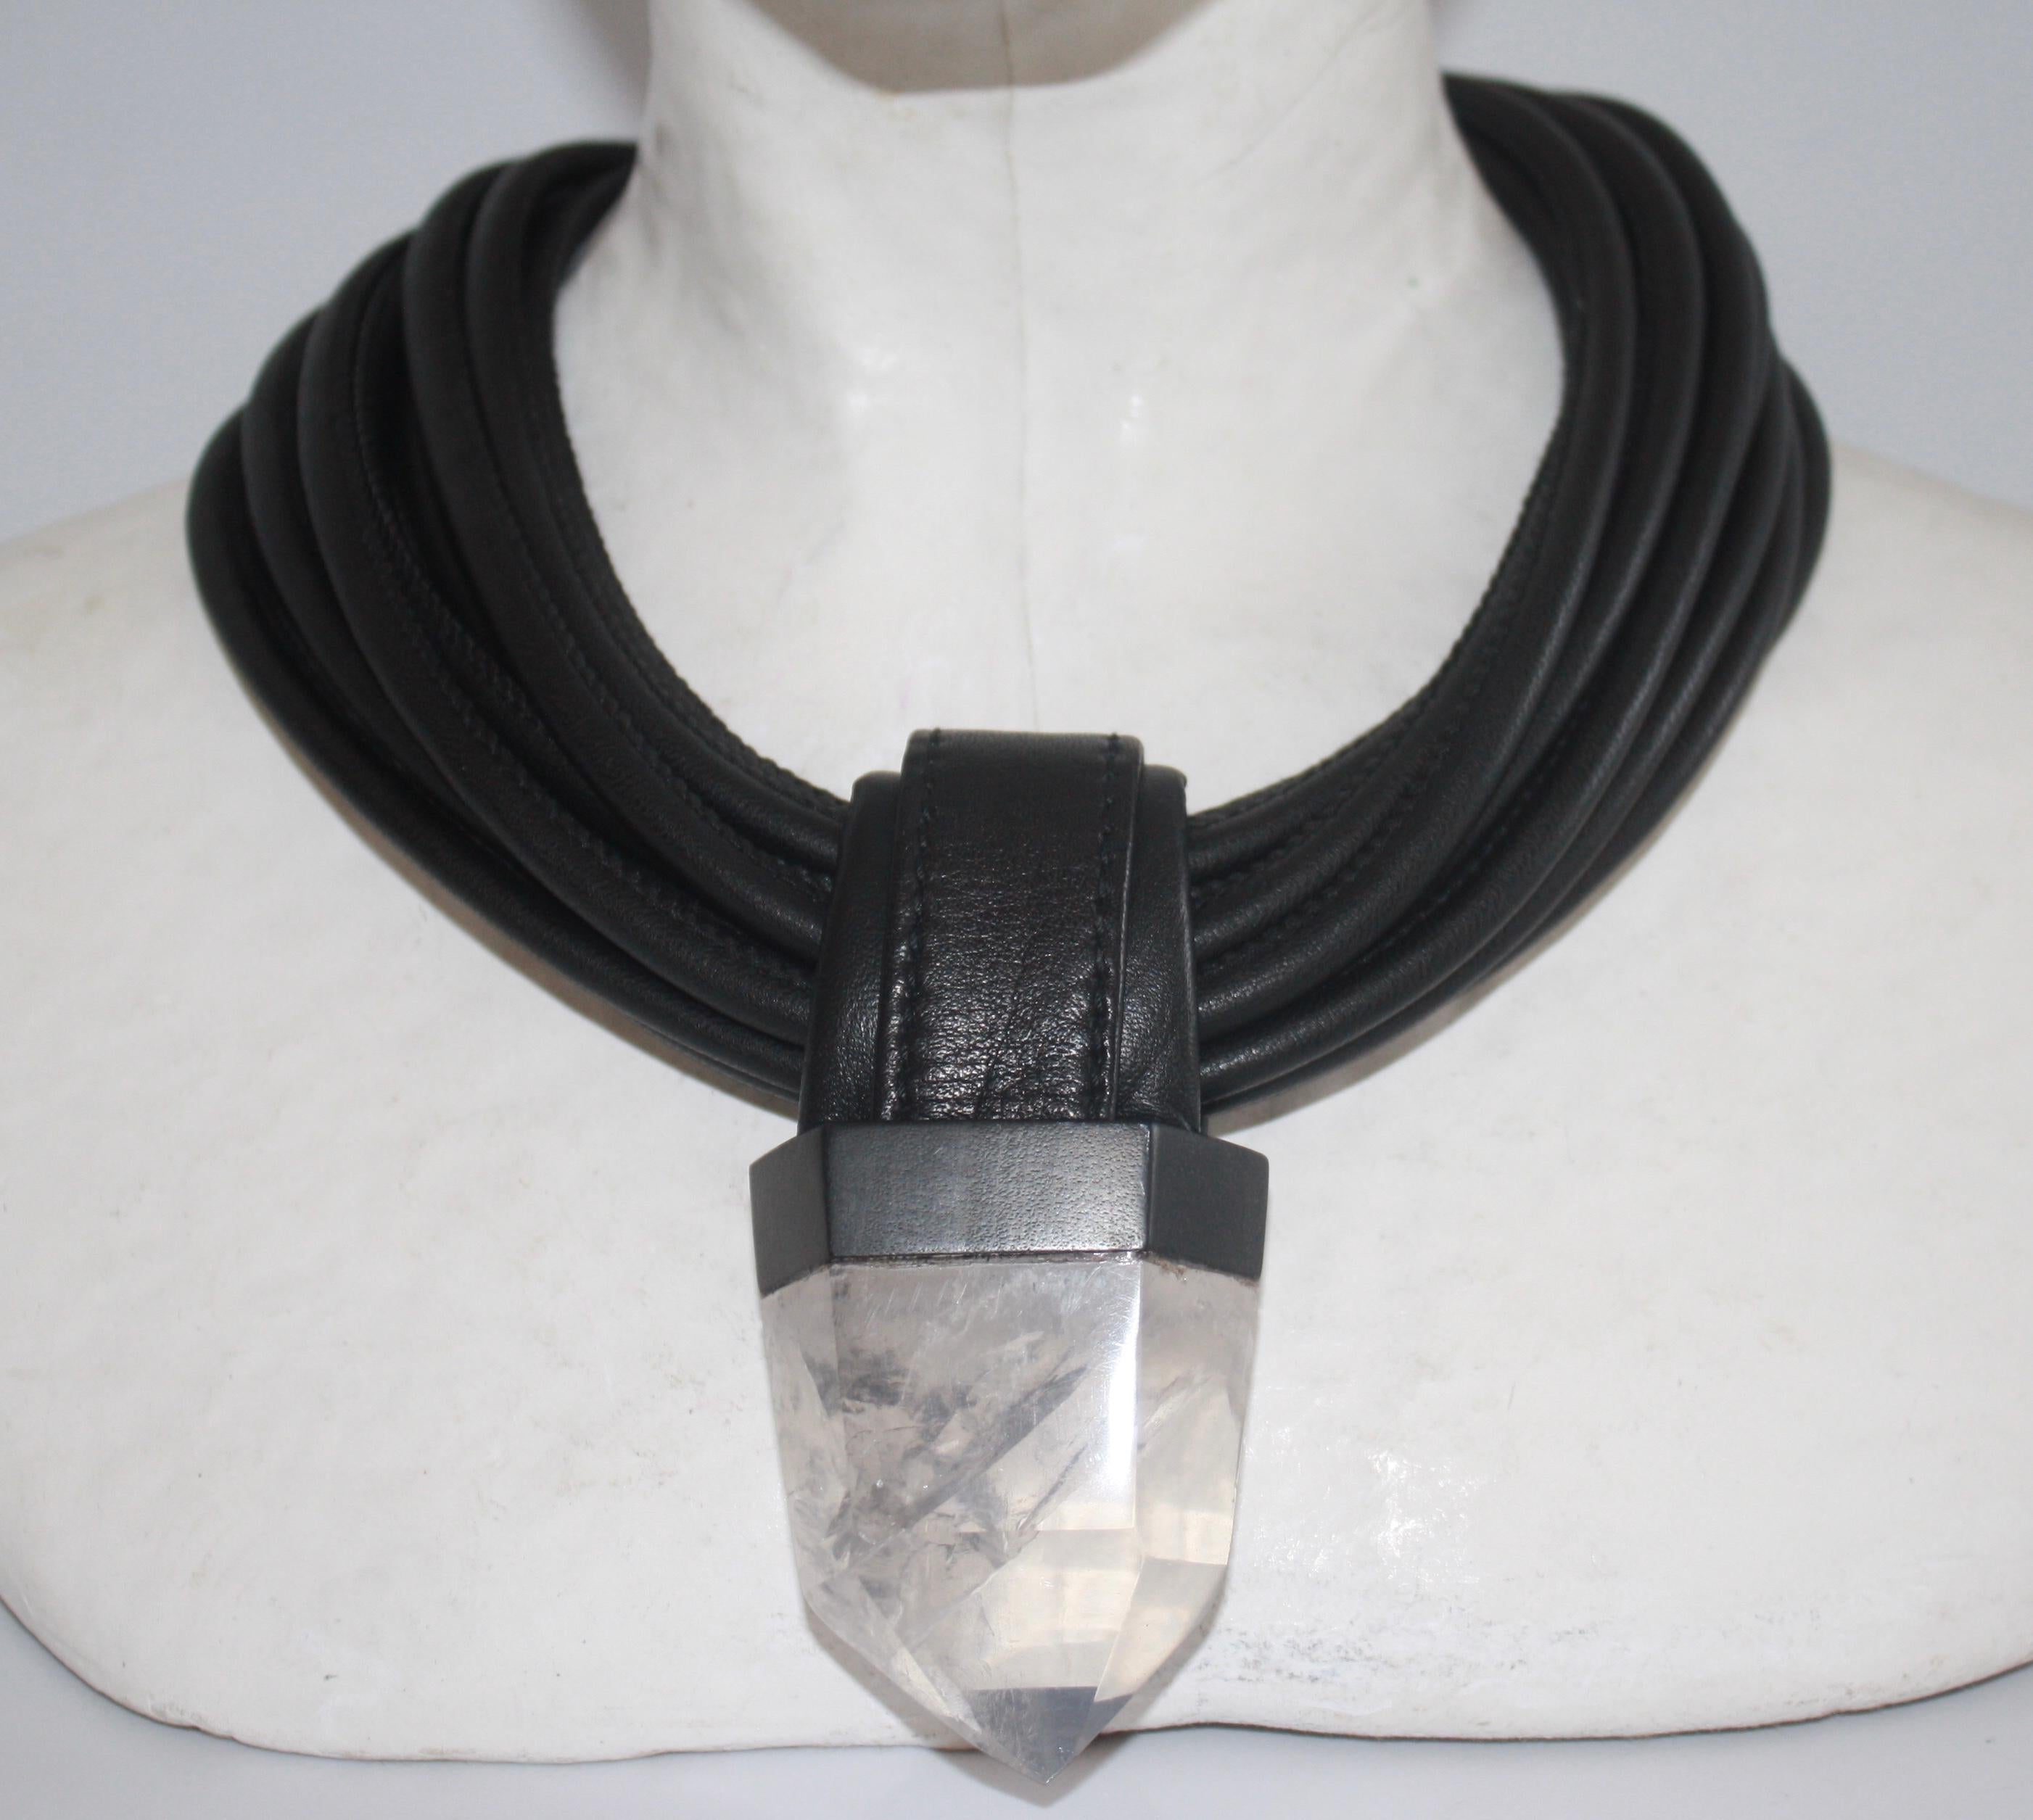 Multi strand leather choker necklace with oversized quartz pendant set in ebony wood from Monies Denmark. Stone is 2.5” long x 1.5” wide and there are 13 strands of leather. 